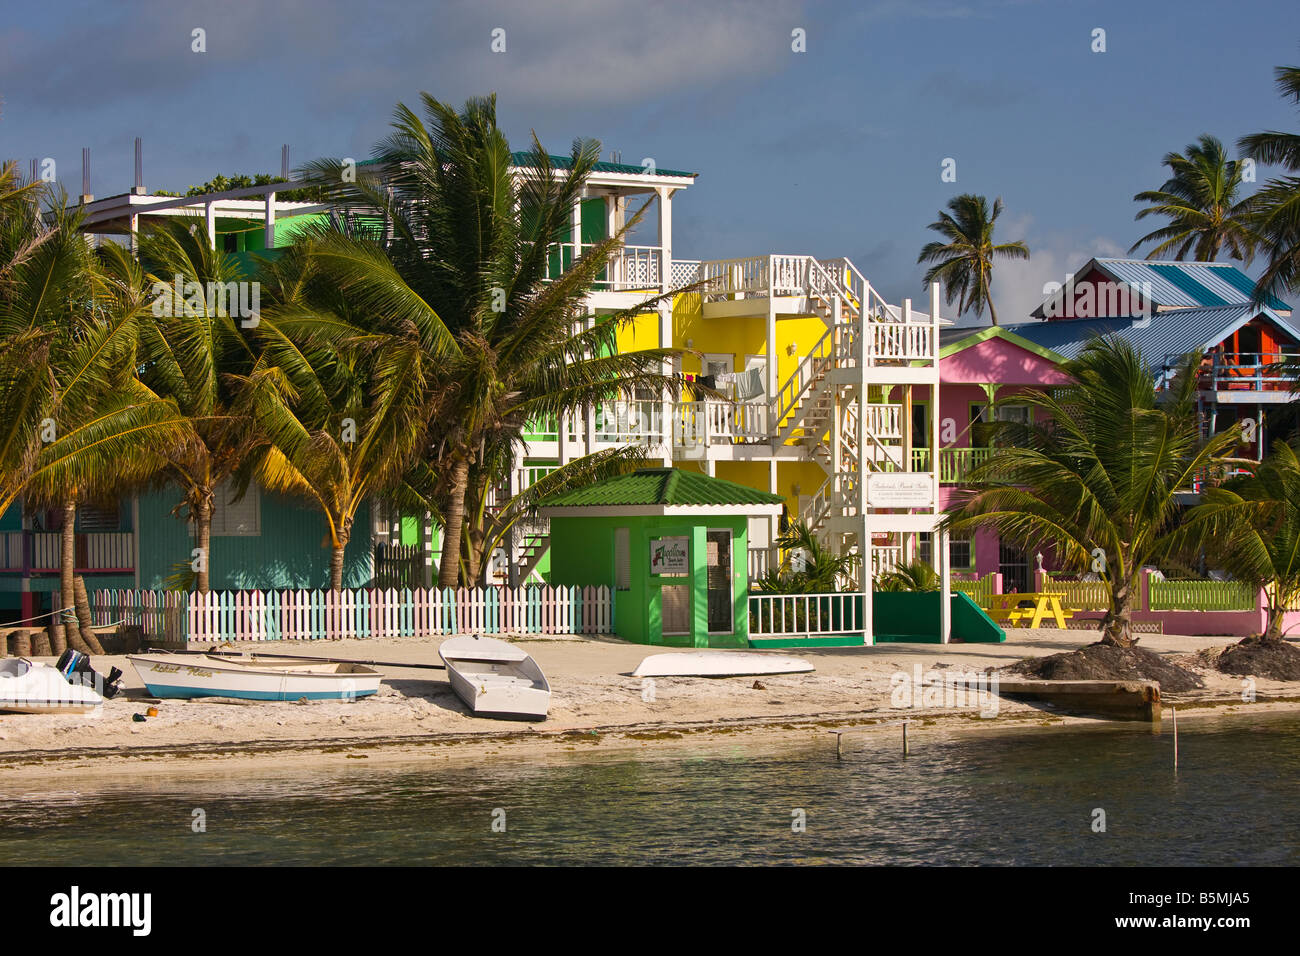 CAYE CAULKER BELIZE Hotels and palm trees on beach Stock Photo